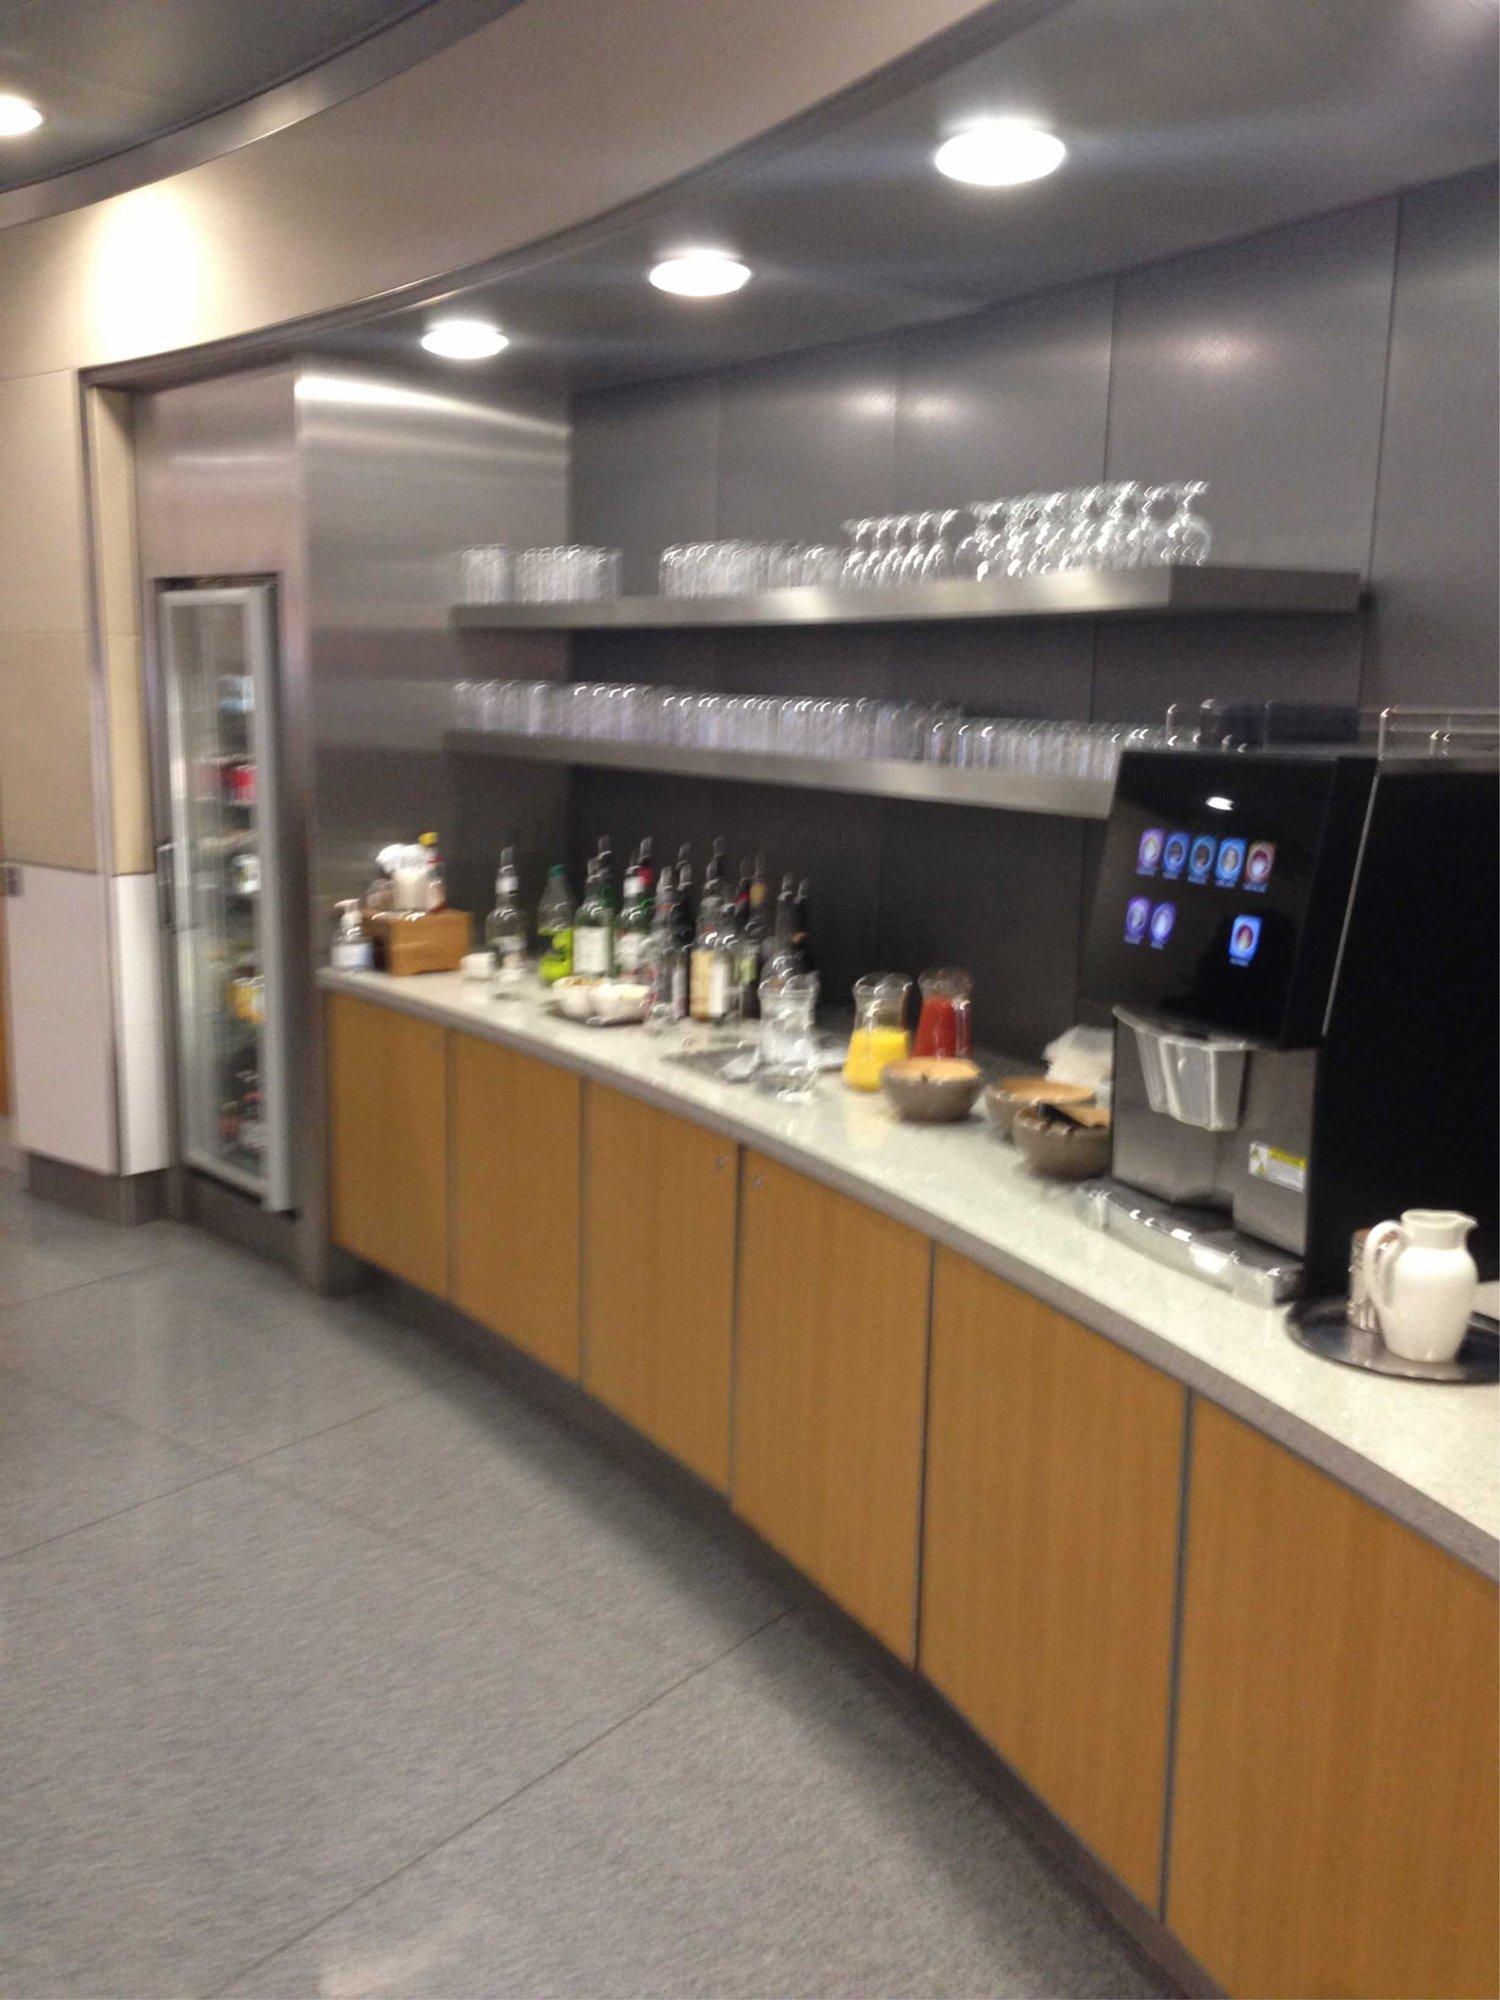 American Airlines Admirals Club image 33 of 38